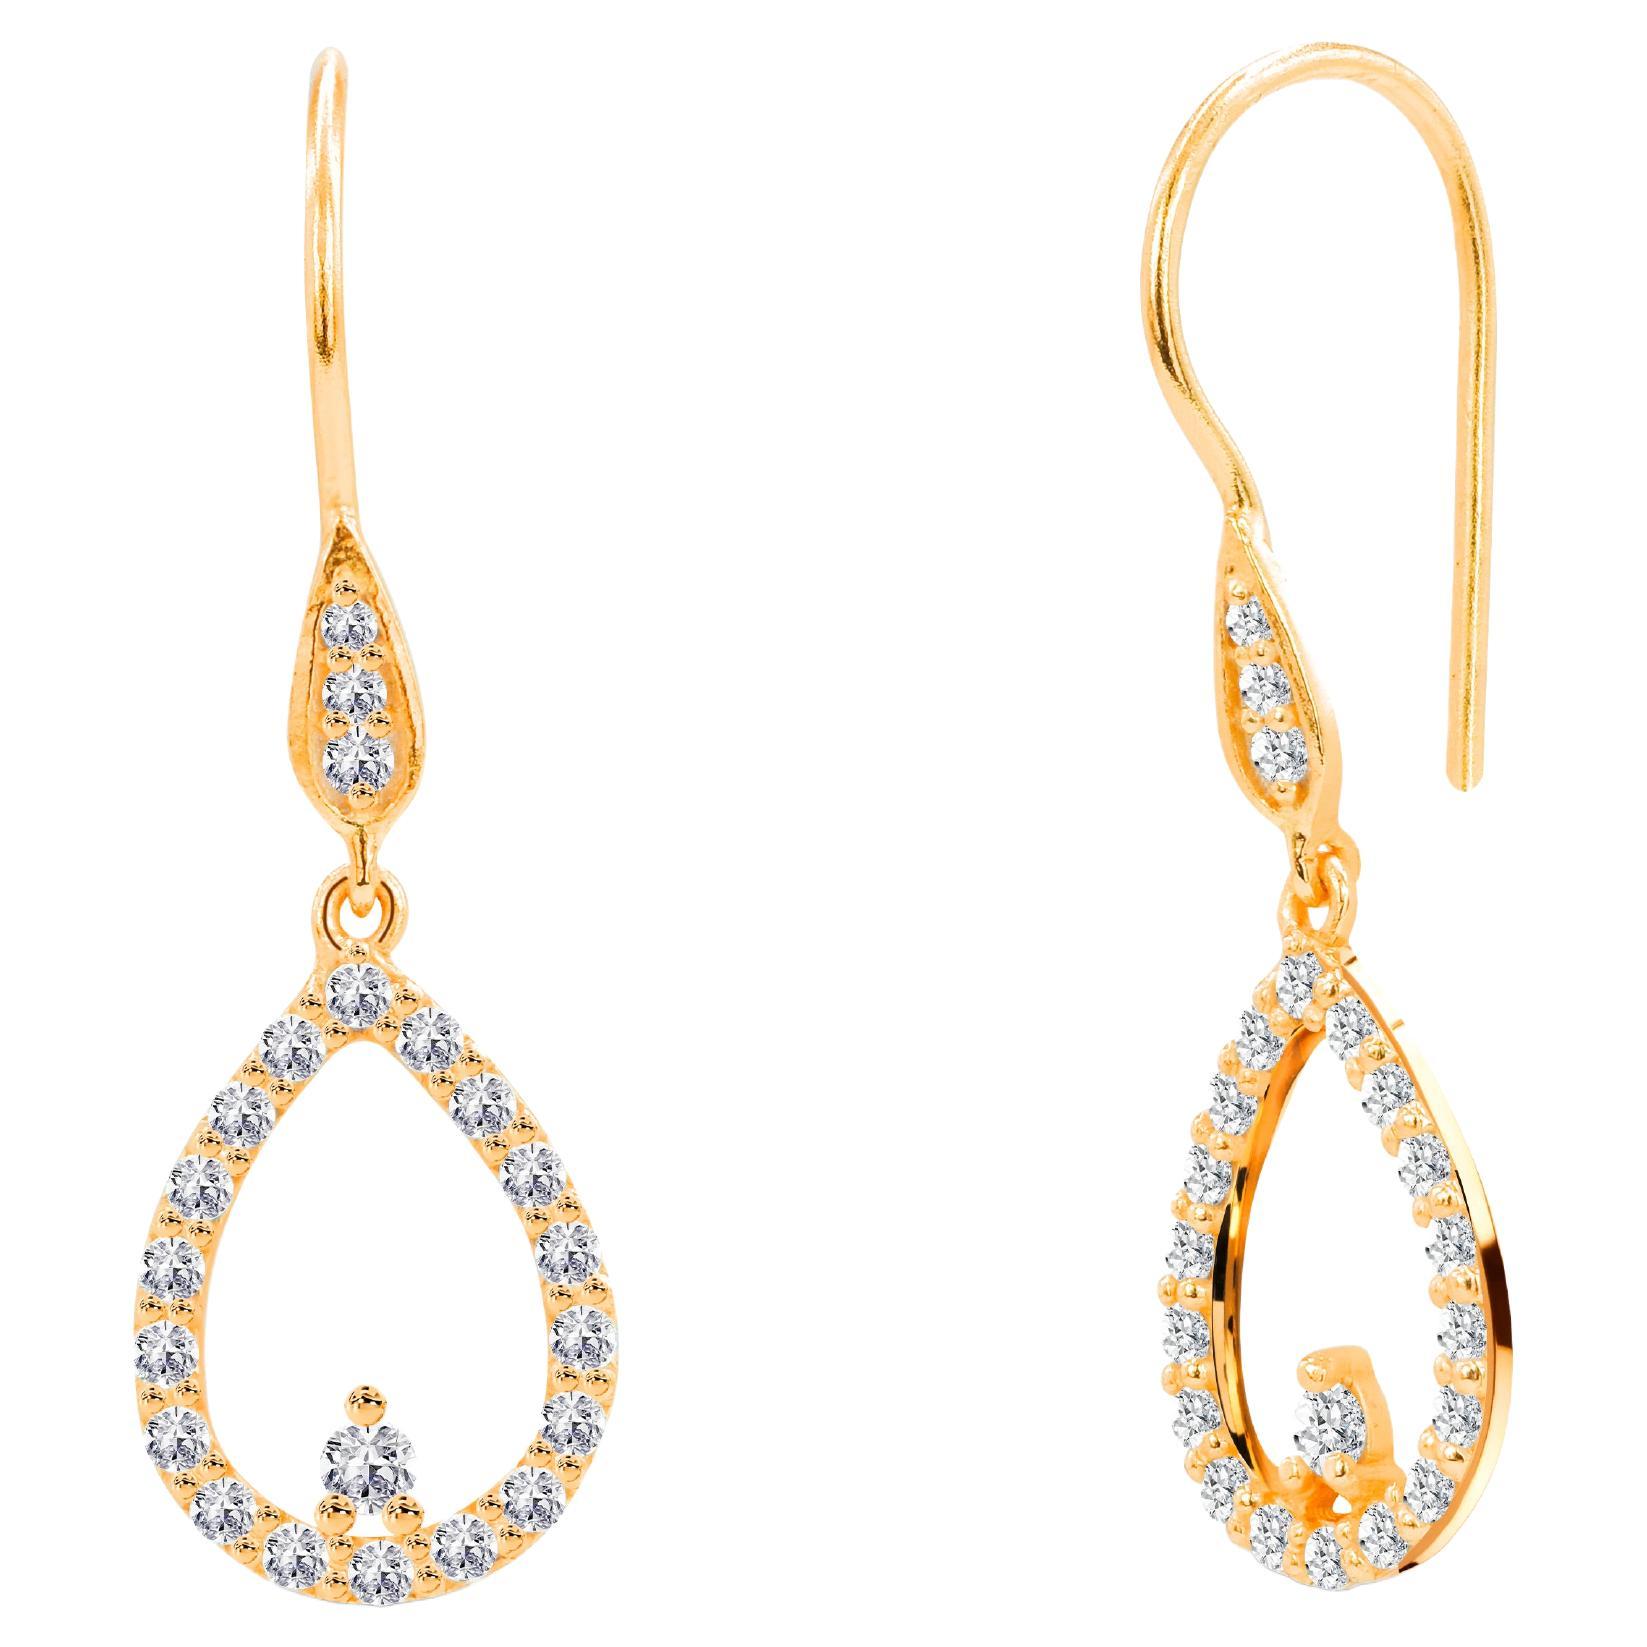 0.43ct Diamond Pear Shaped and Solitaire Diamond Dangle Earrings in 18k Gold